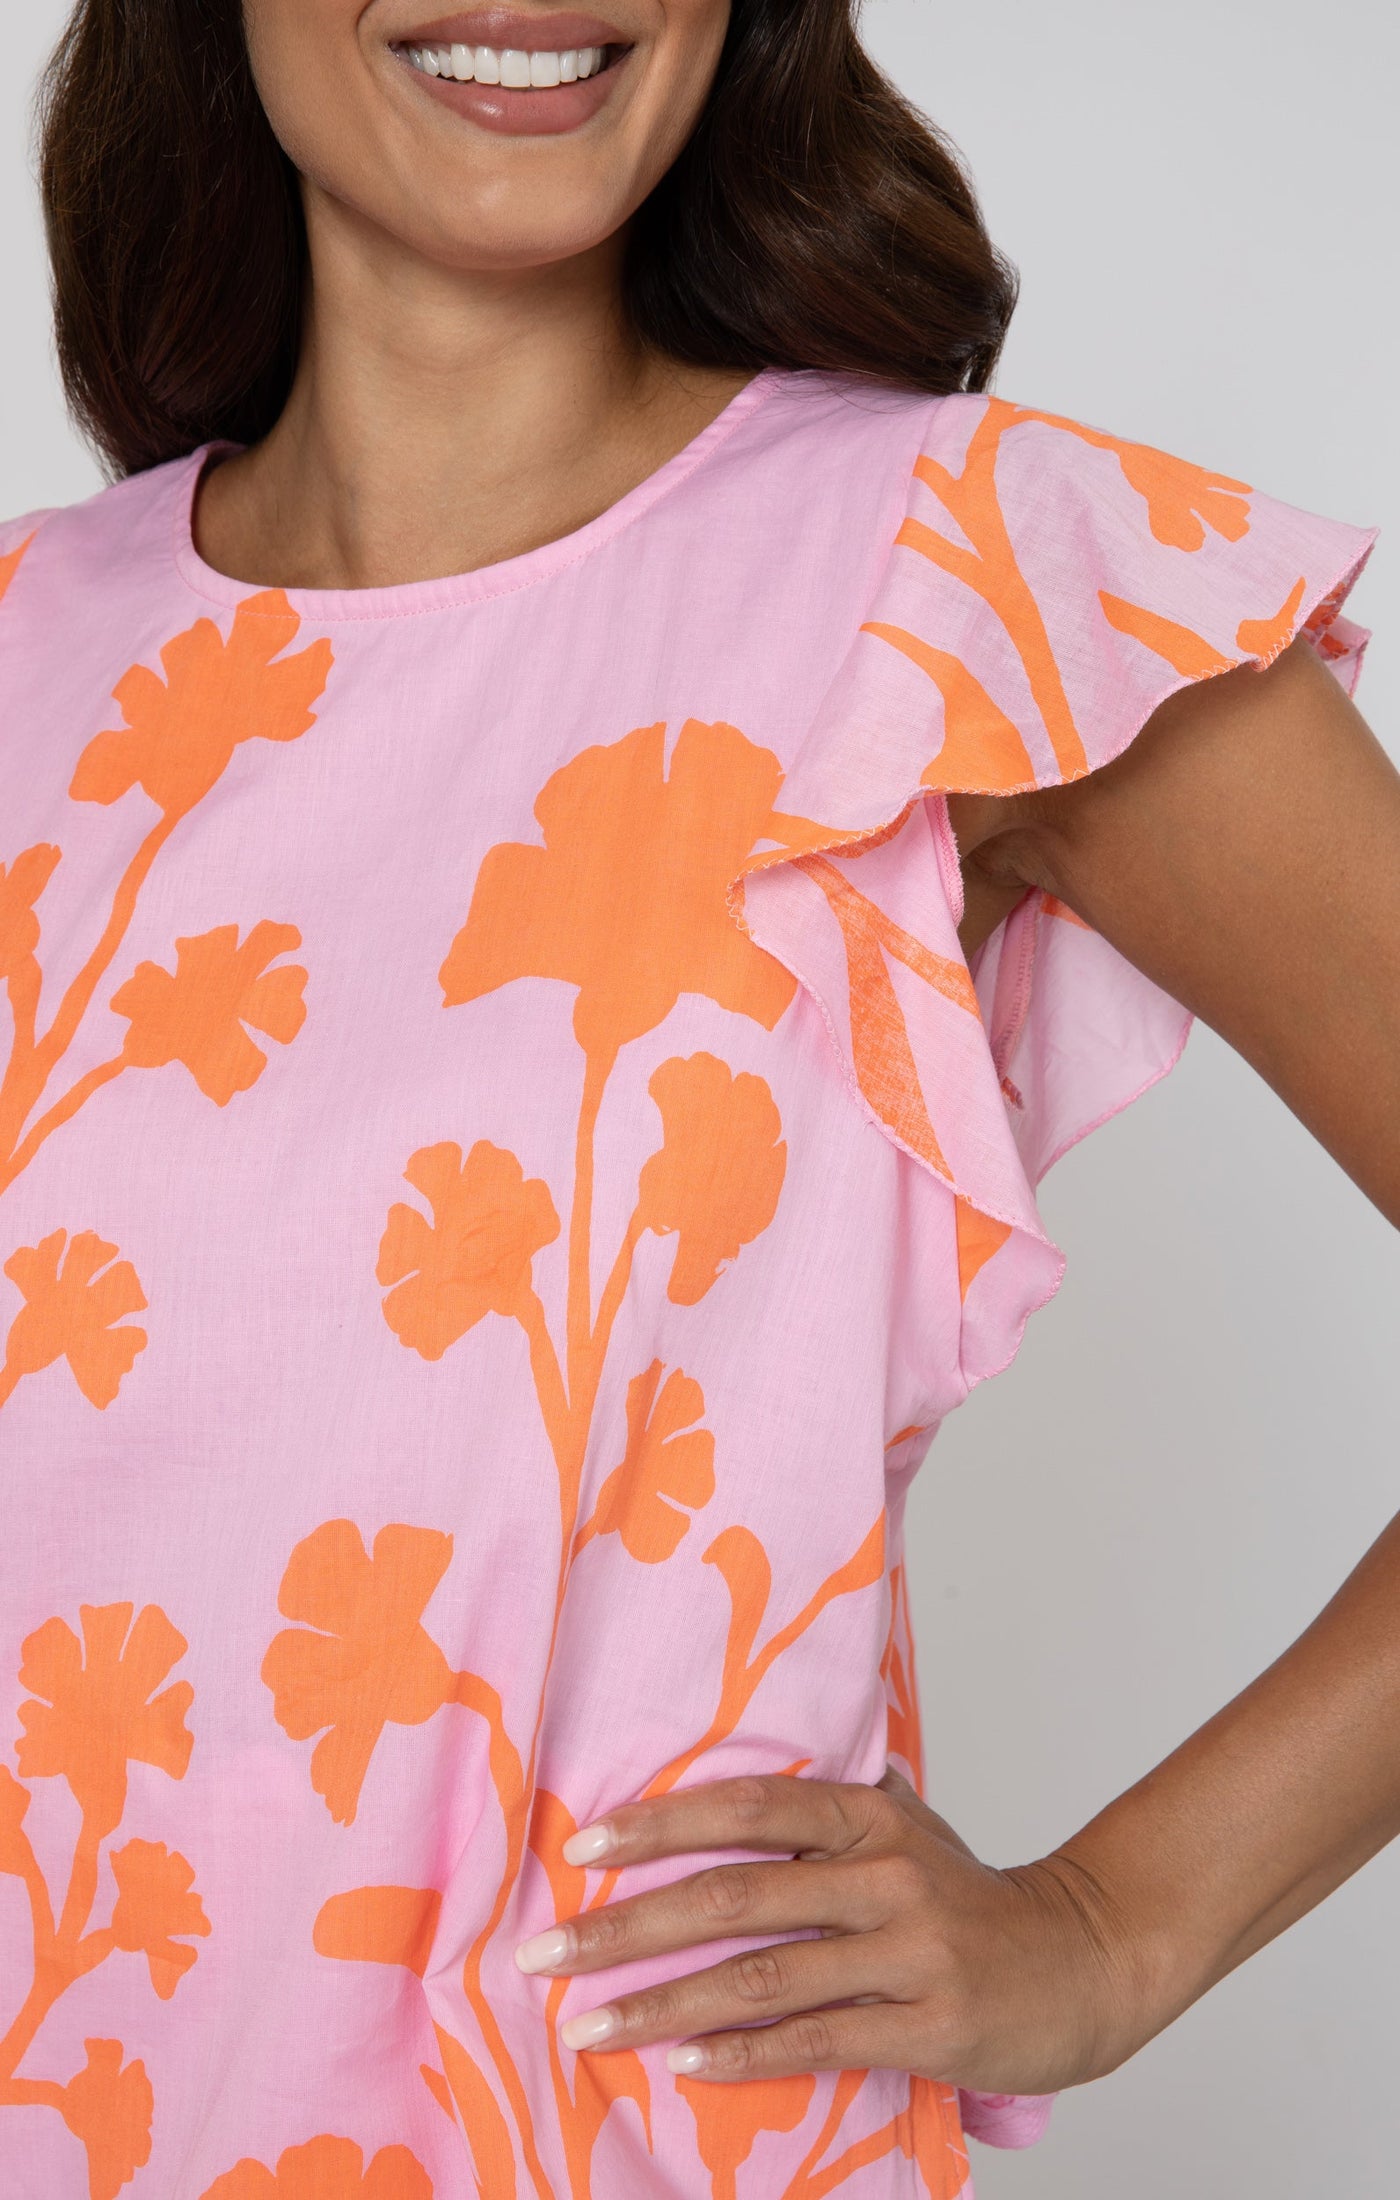 Majorelle Print Frill Top in Pink and Orange by JULIET DUNN